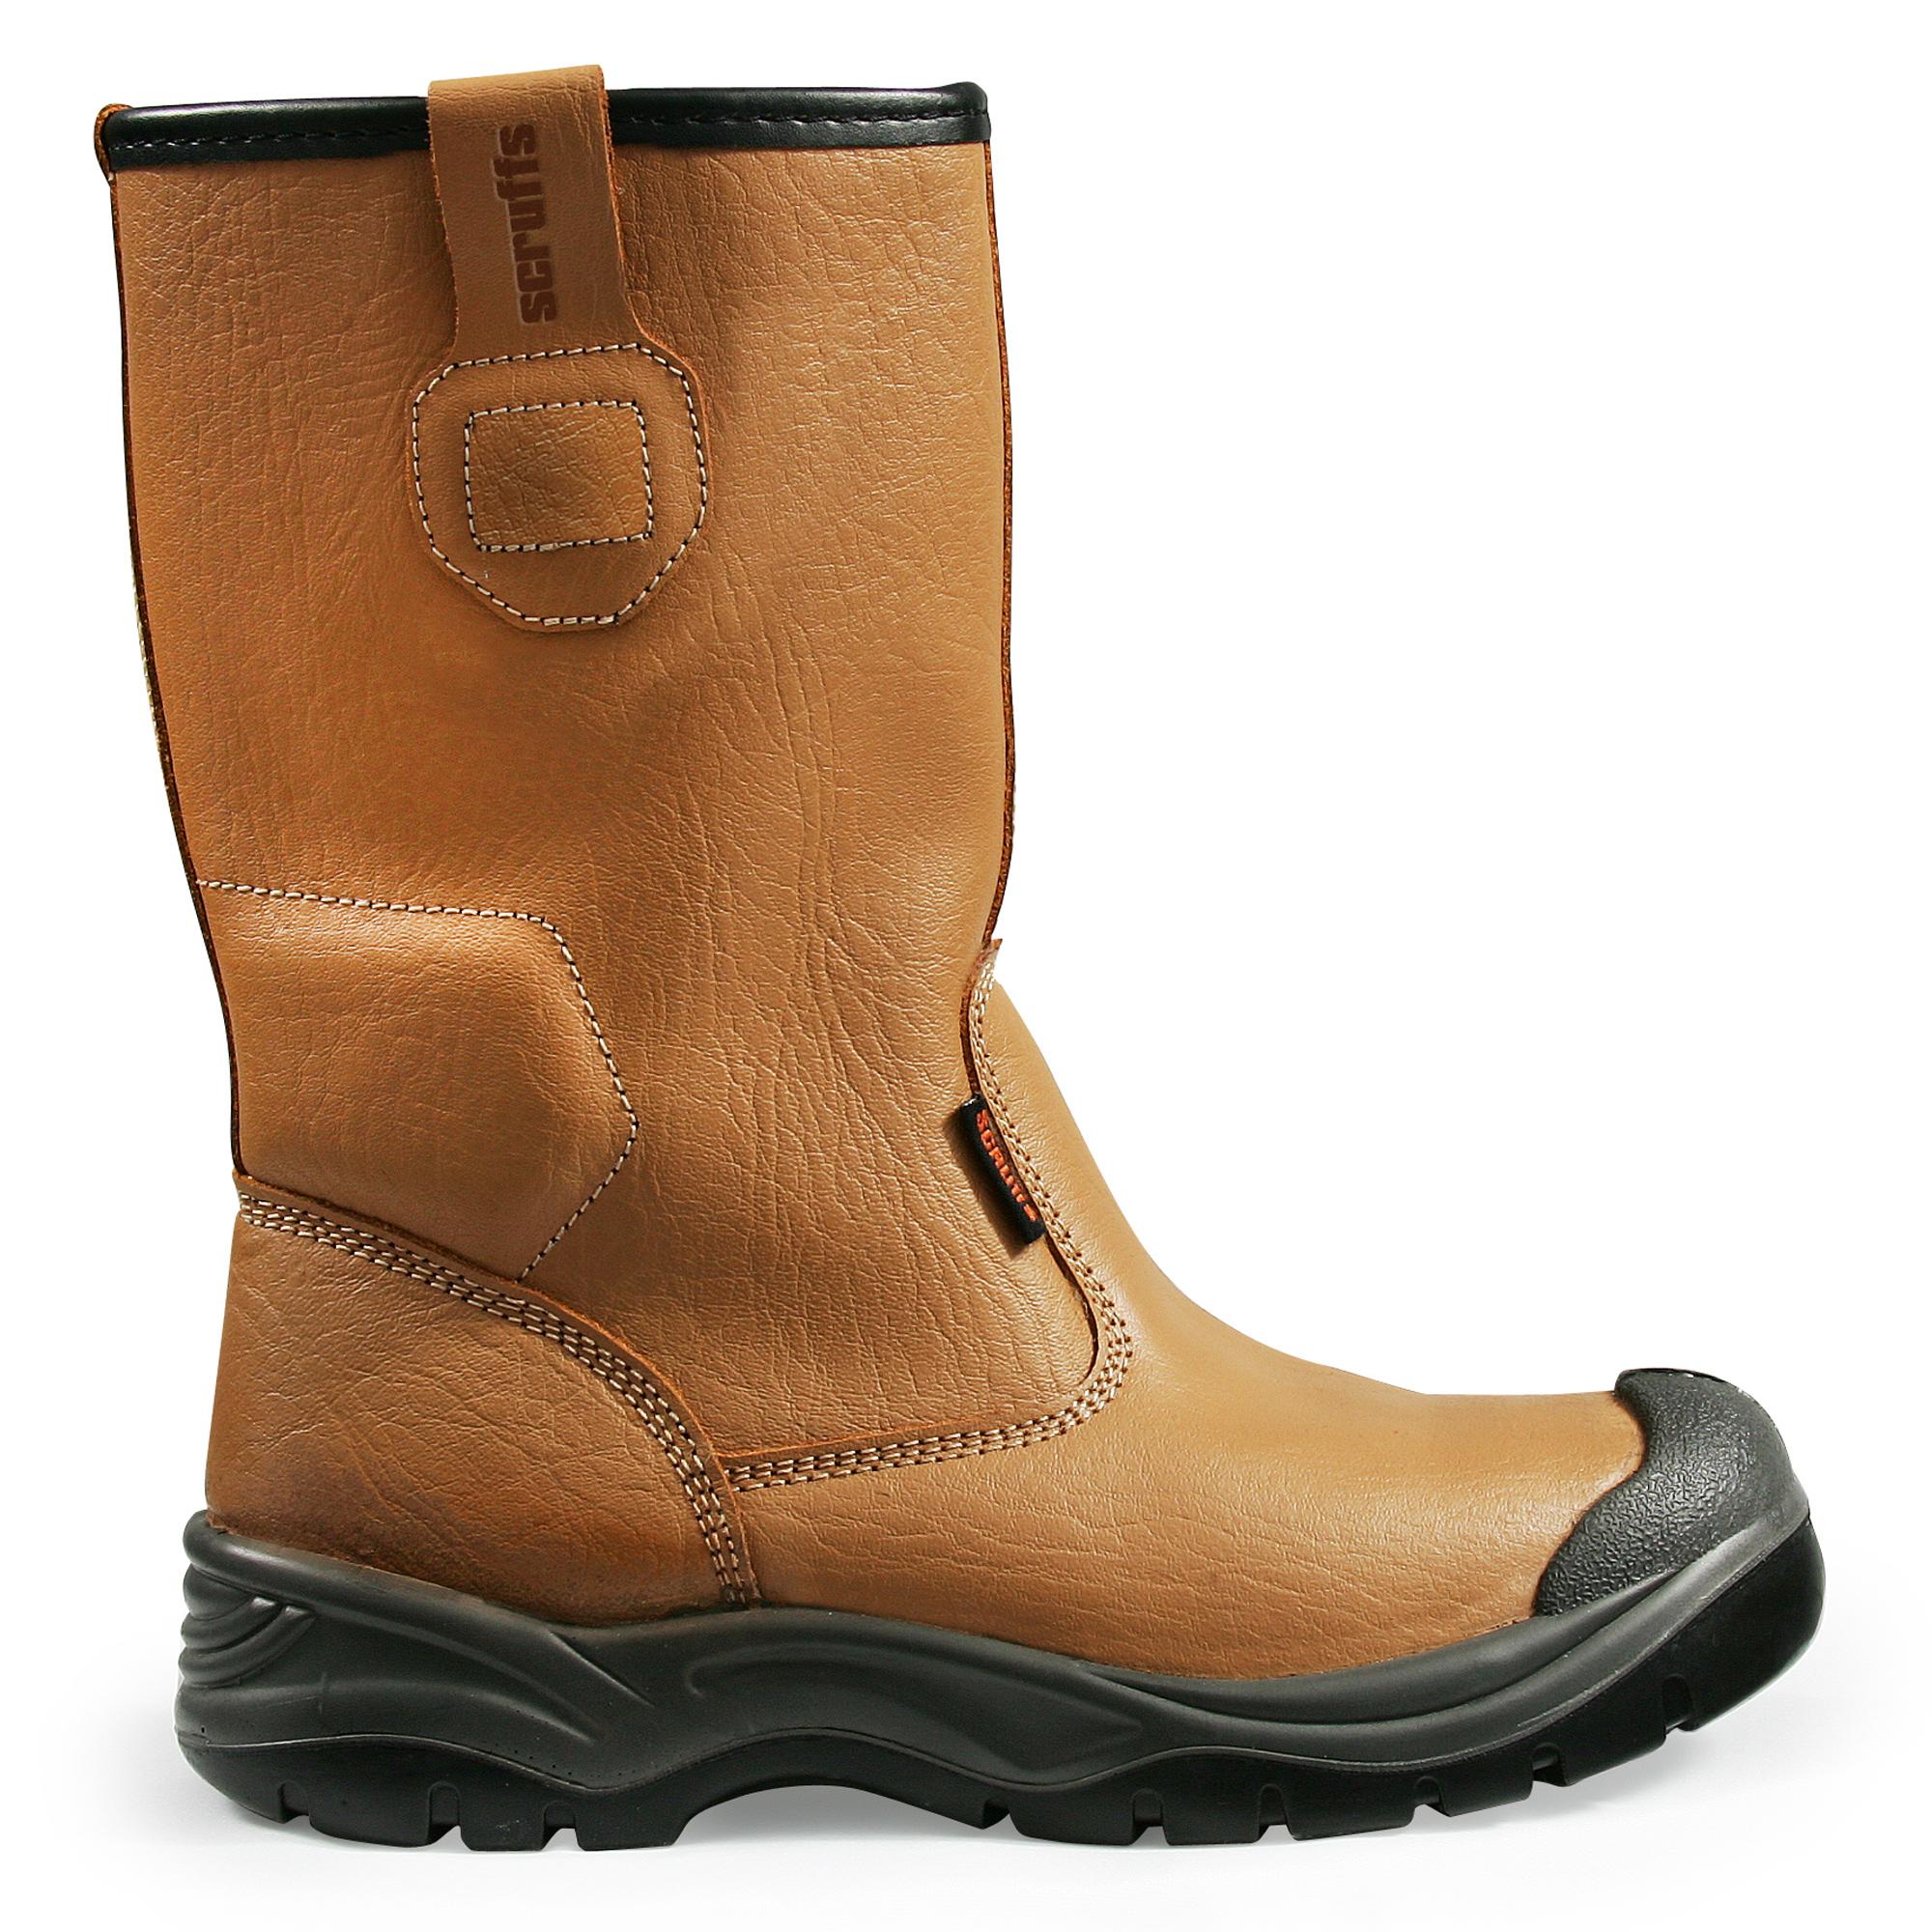 Scruffs Gravity Rigger Safety Boots